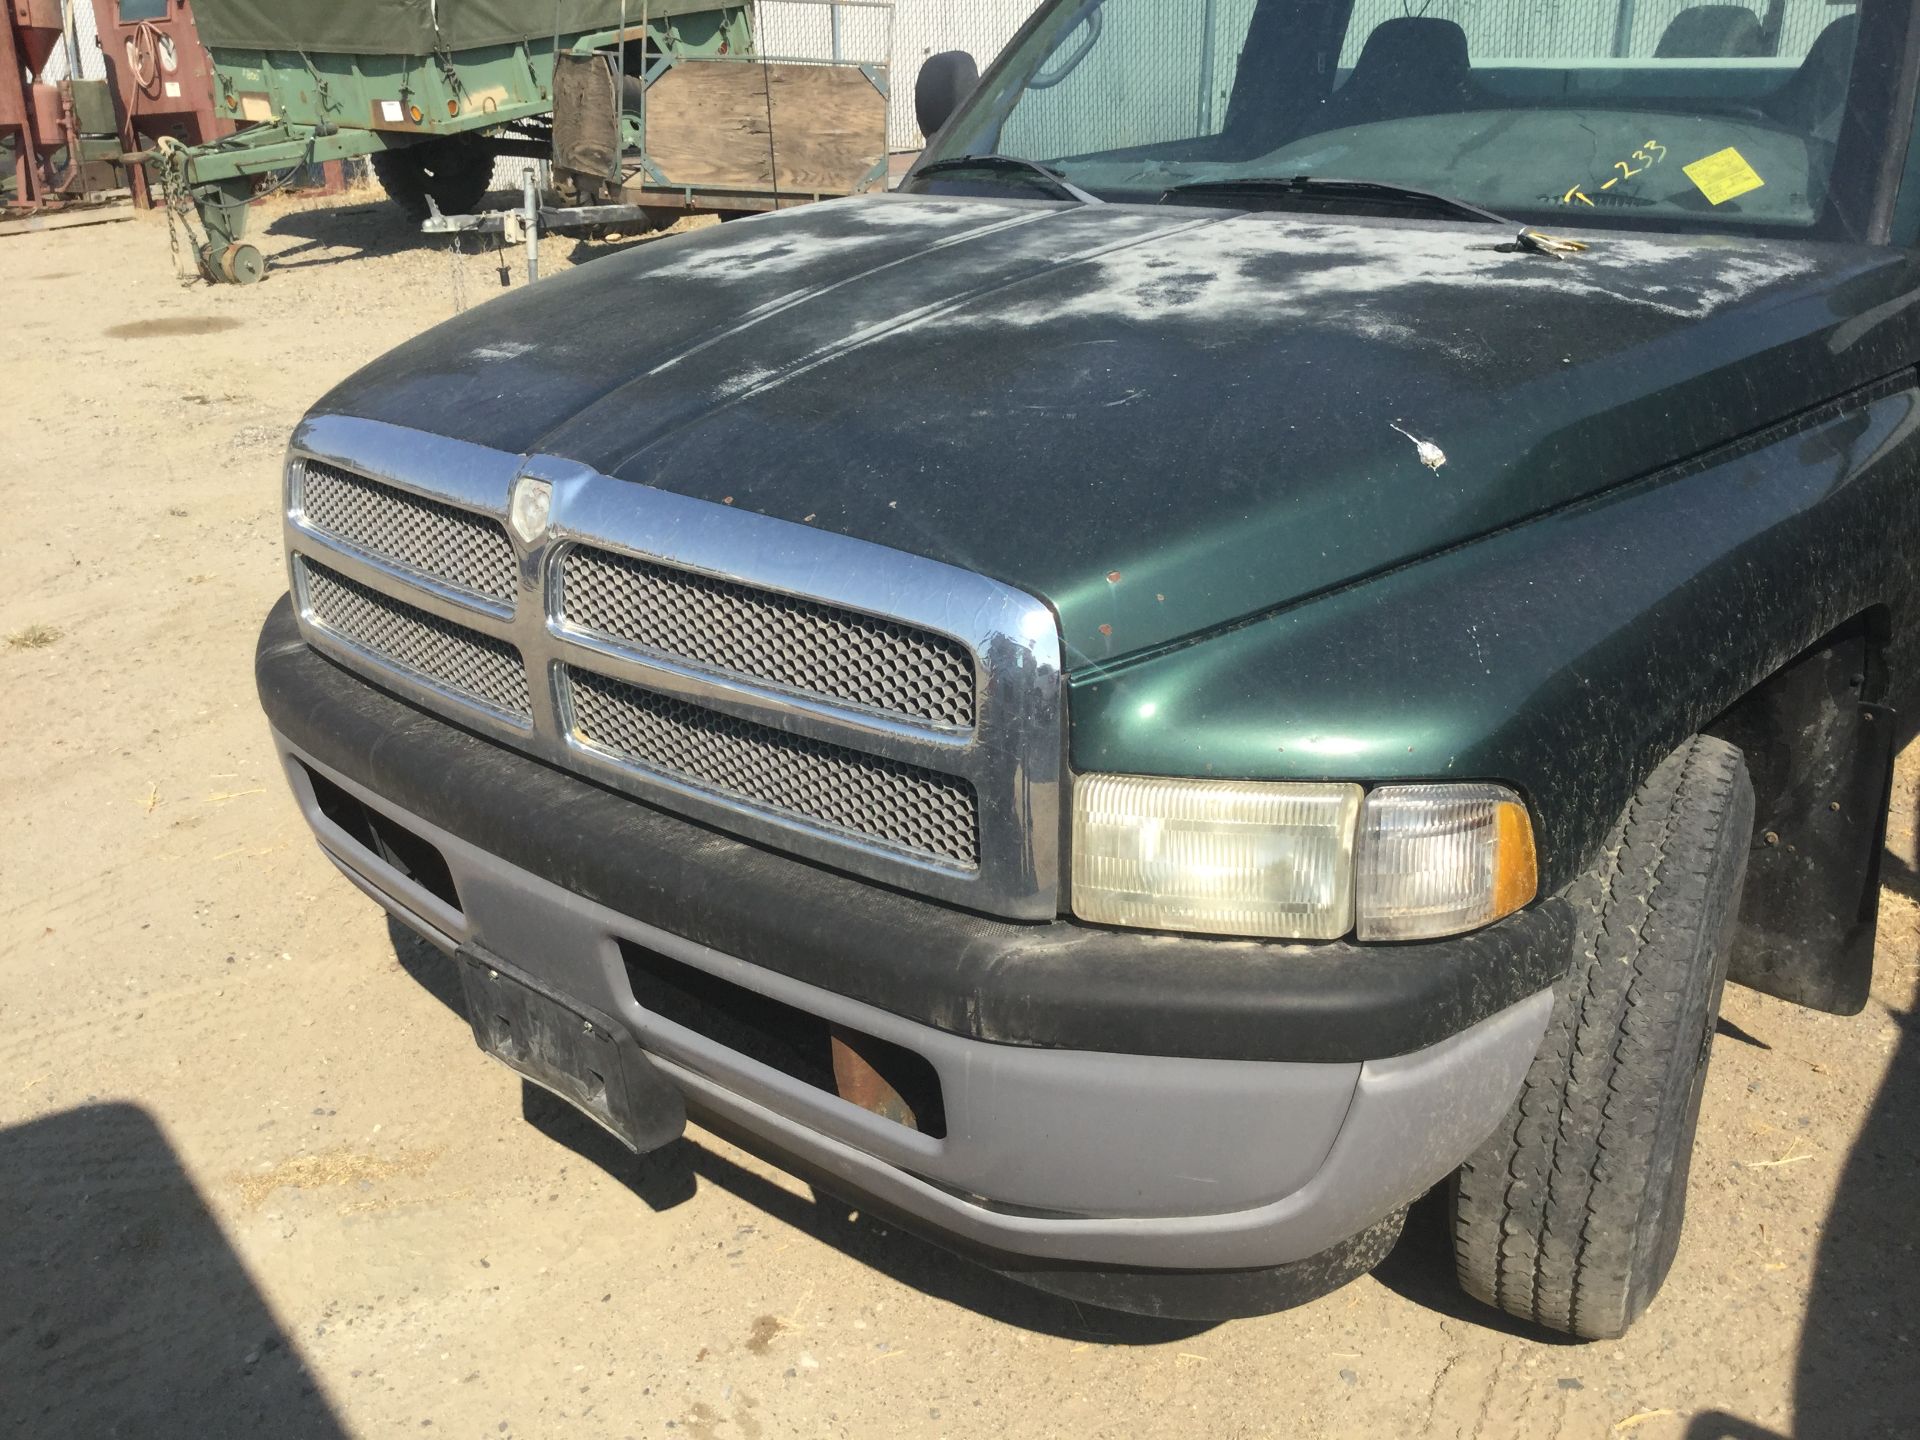 Year: 2000 Make: Dodge Model: 1/2T Type: Pickup Vin#: 561821 Mileage/Hours: 176001 3.9L, 2WD, RC, - Image 2 of 4